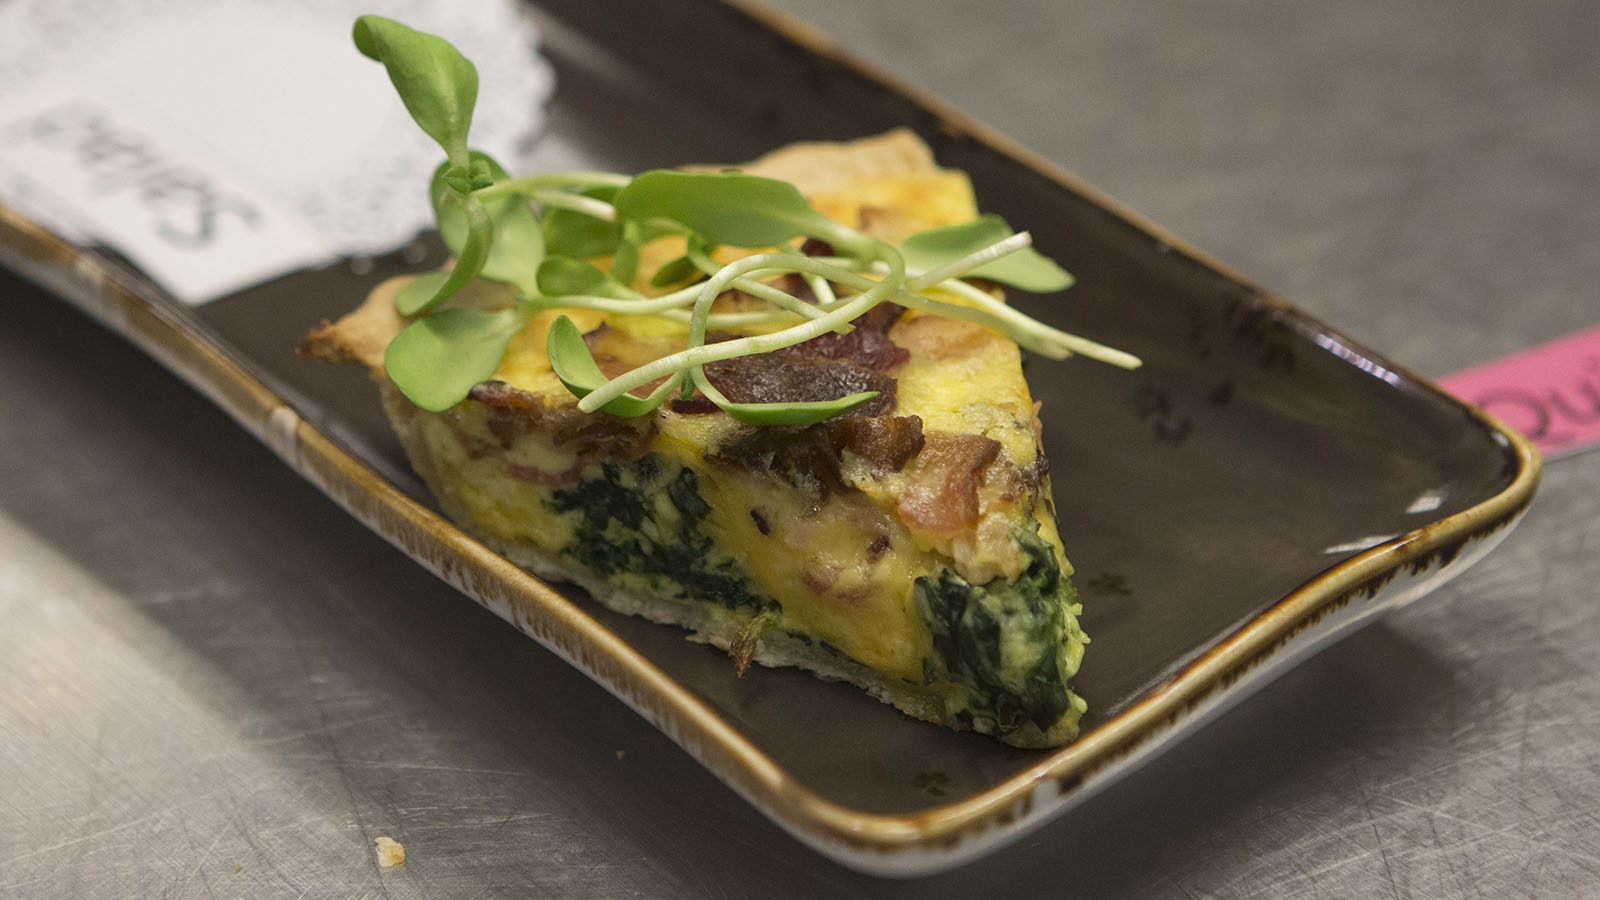 A variety of quiche is offered on the specials menu.